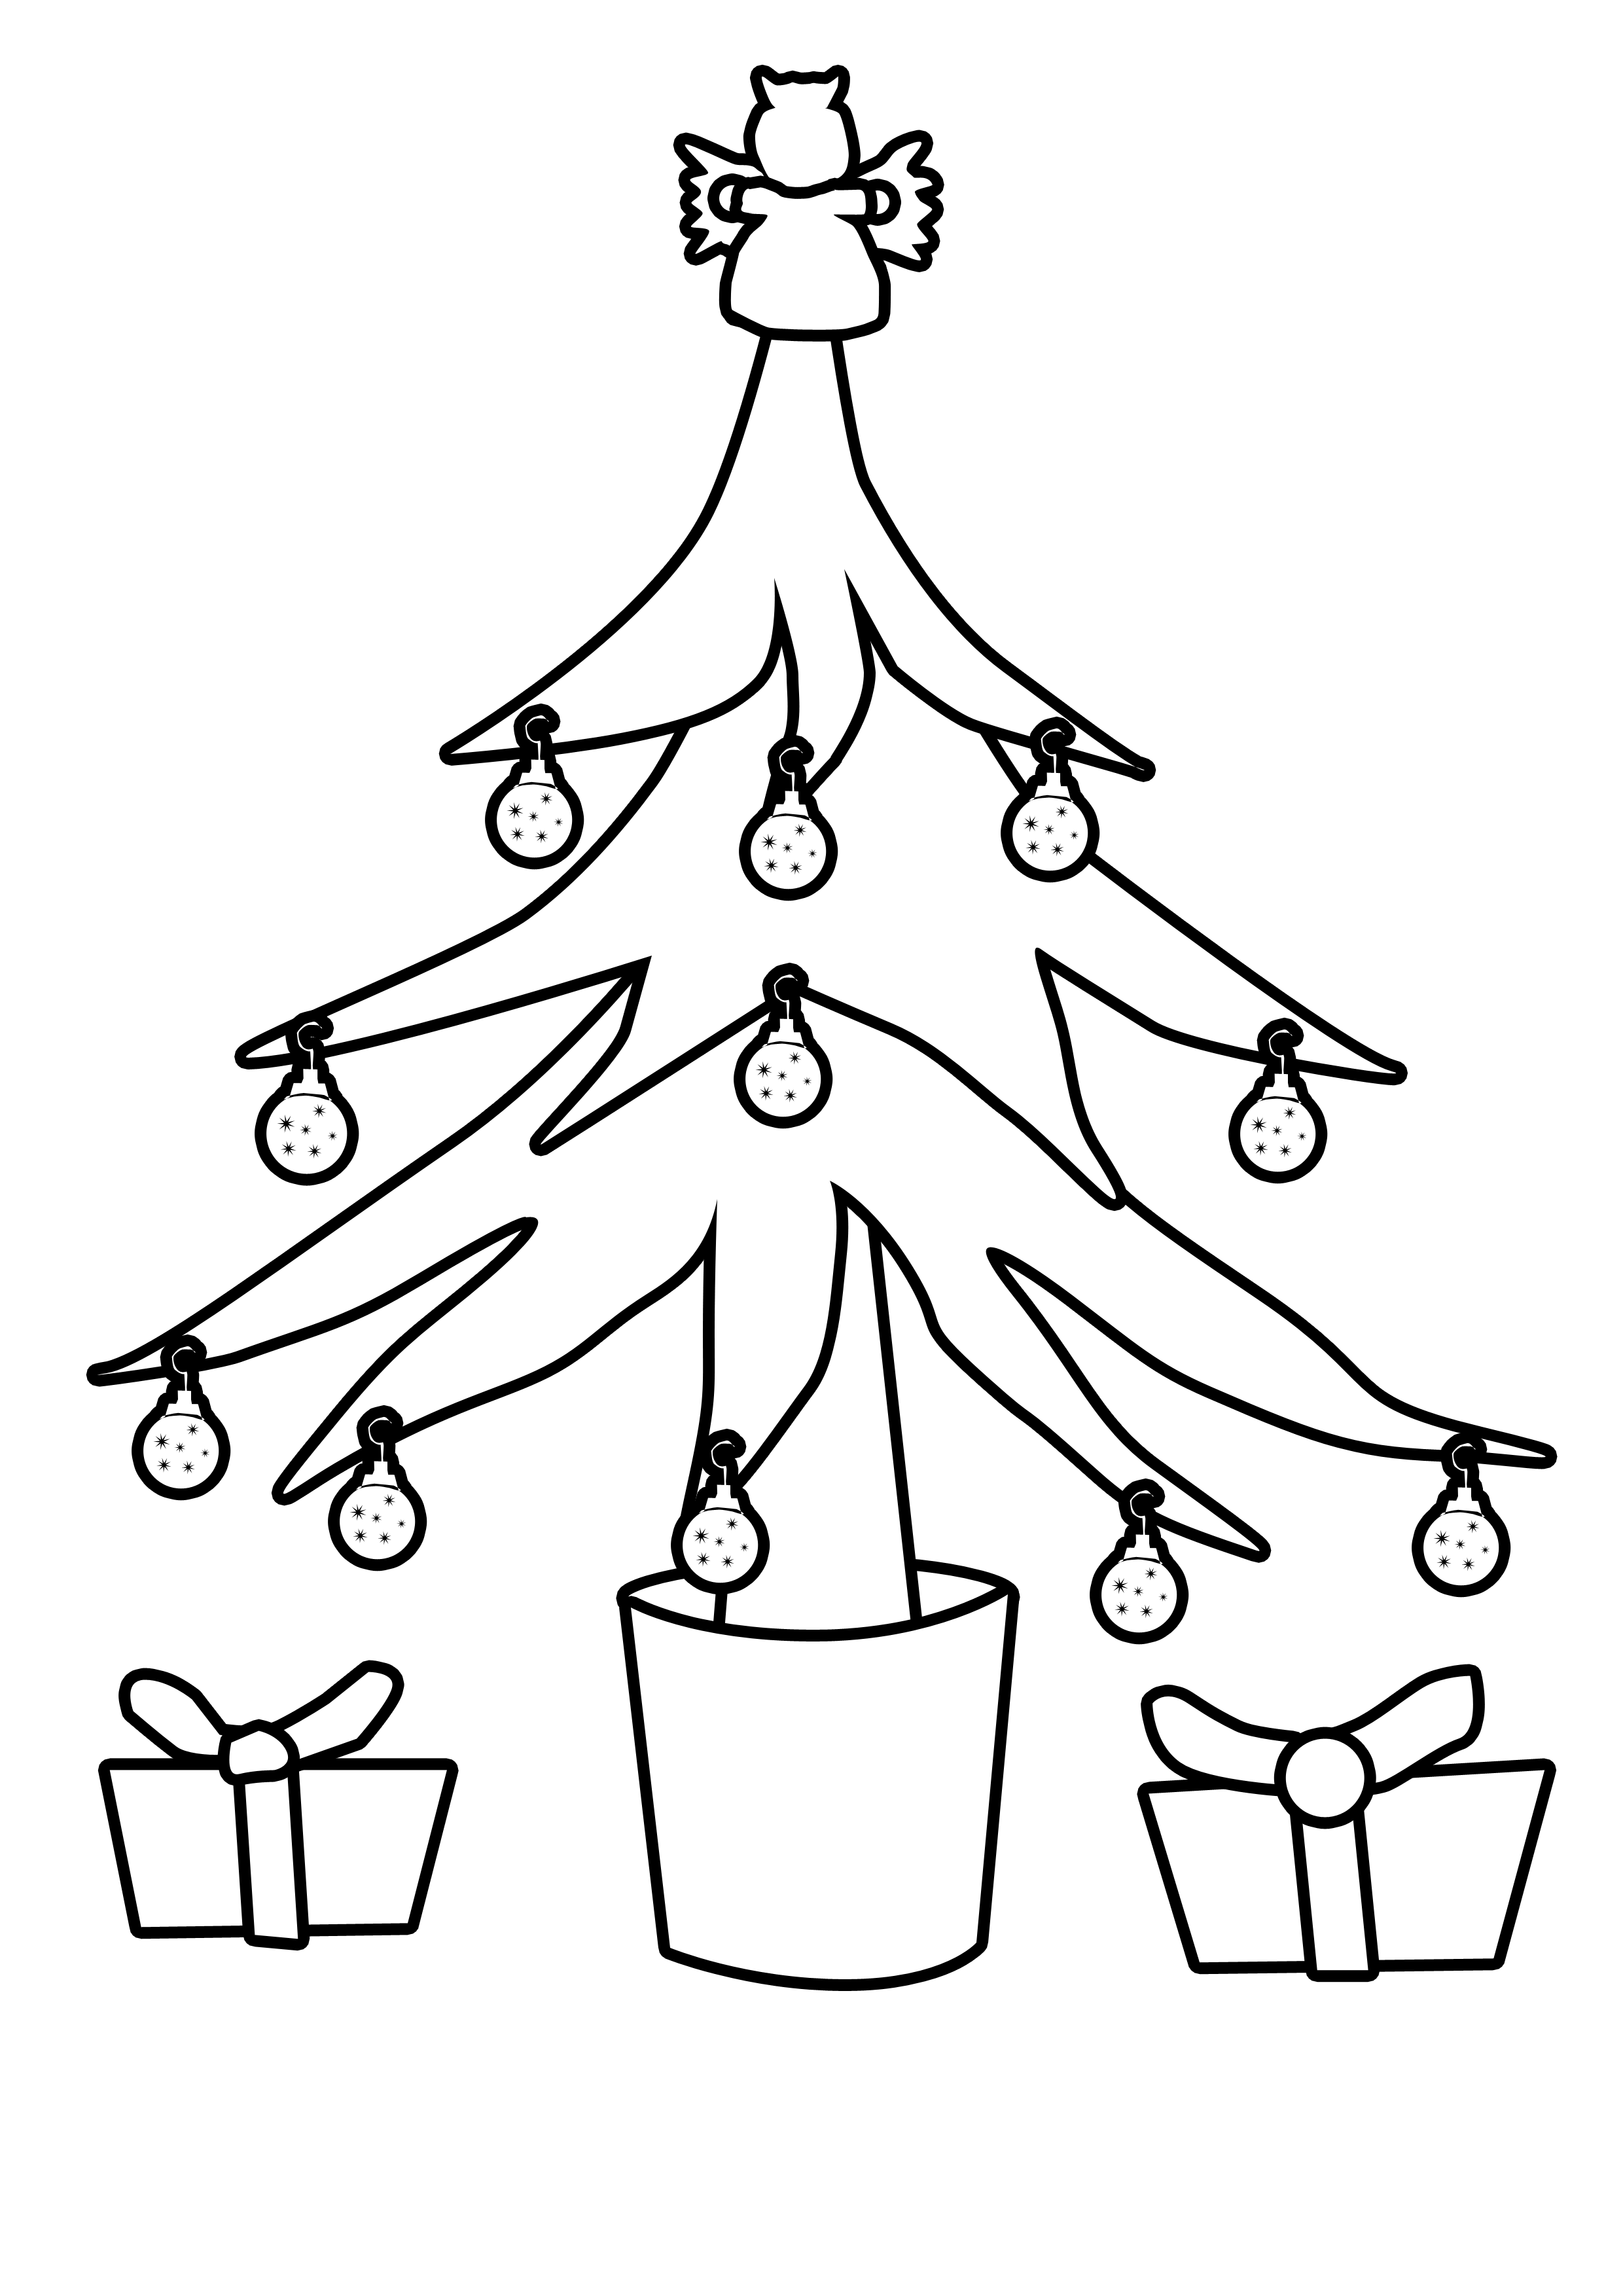 Clip Art Christmas Tree Outline | Clipart Panda - Free Clipart Images